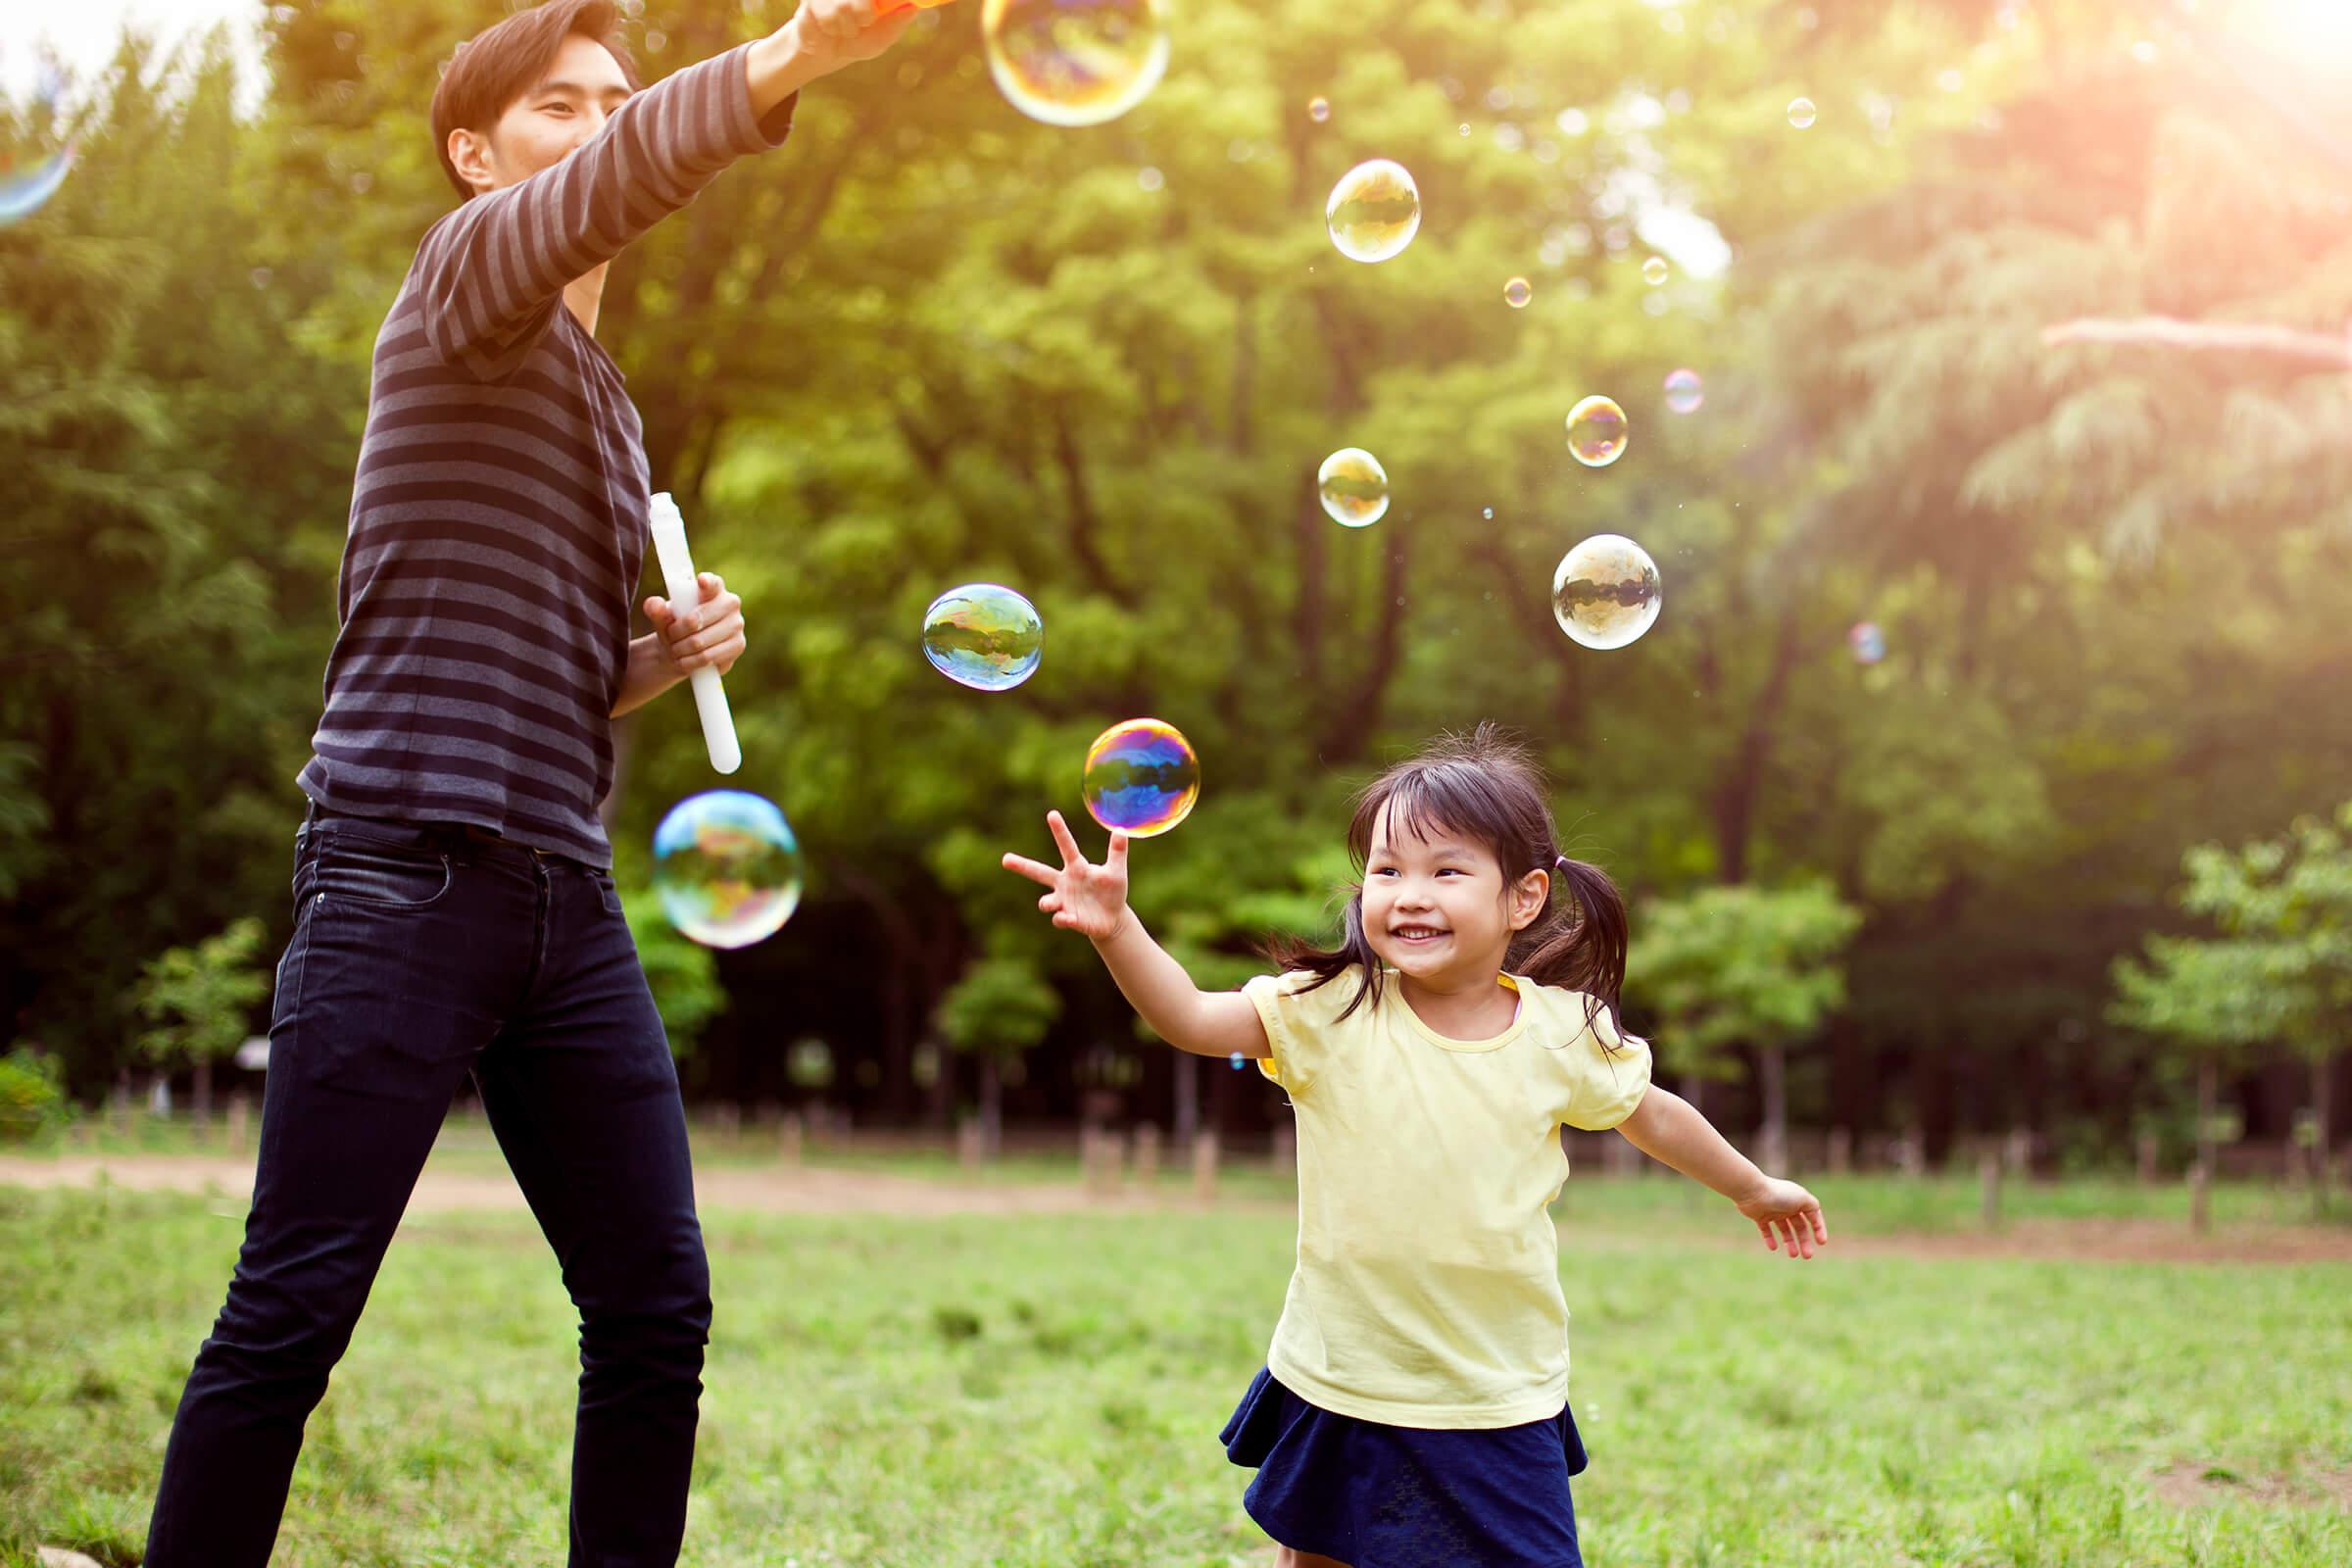 Father and daughter having fun in park with Soap Bubbles iStock-501485932.jpg